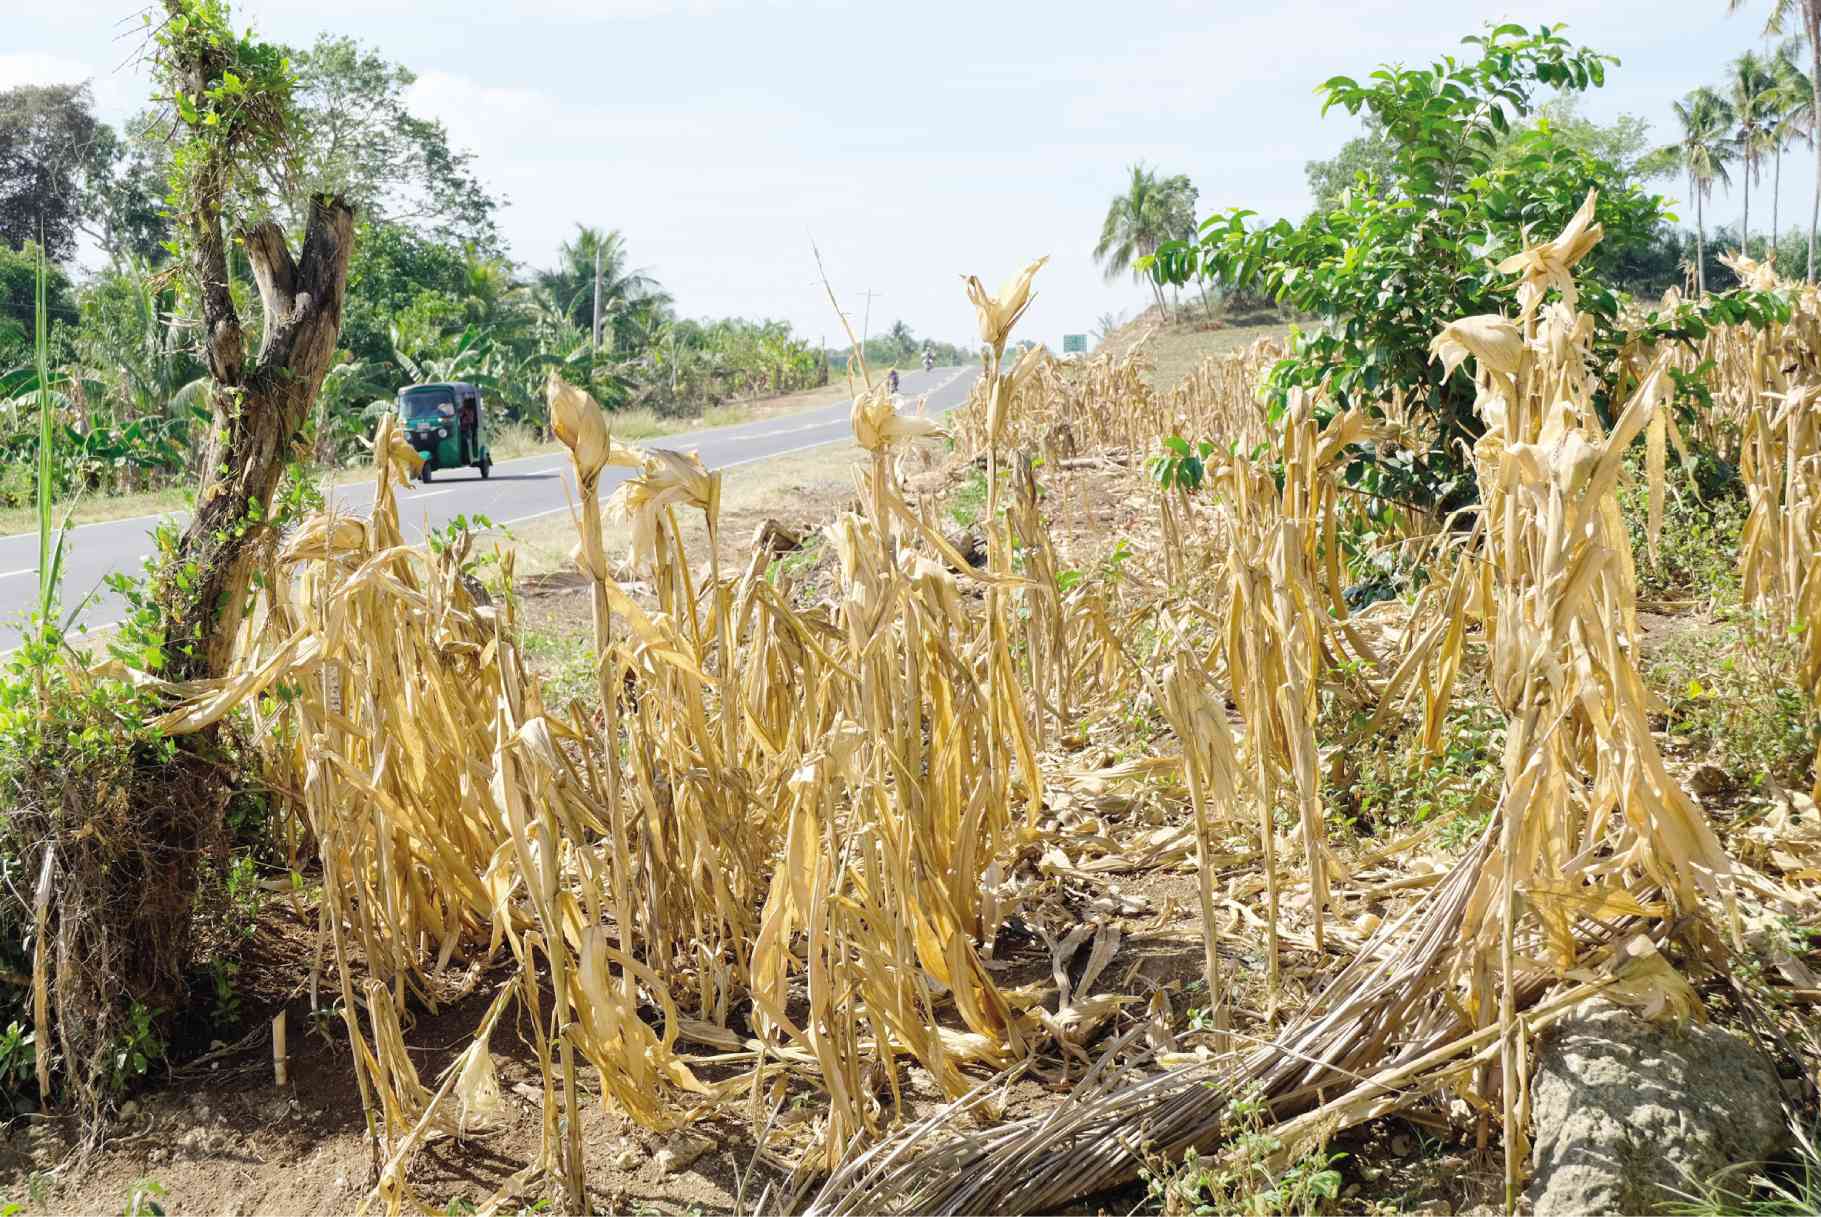 San Carlos City in Negros Occidental was placed under a state of calamity amid the devastation brought about by the El Niño phenomenon.